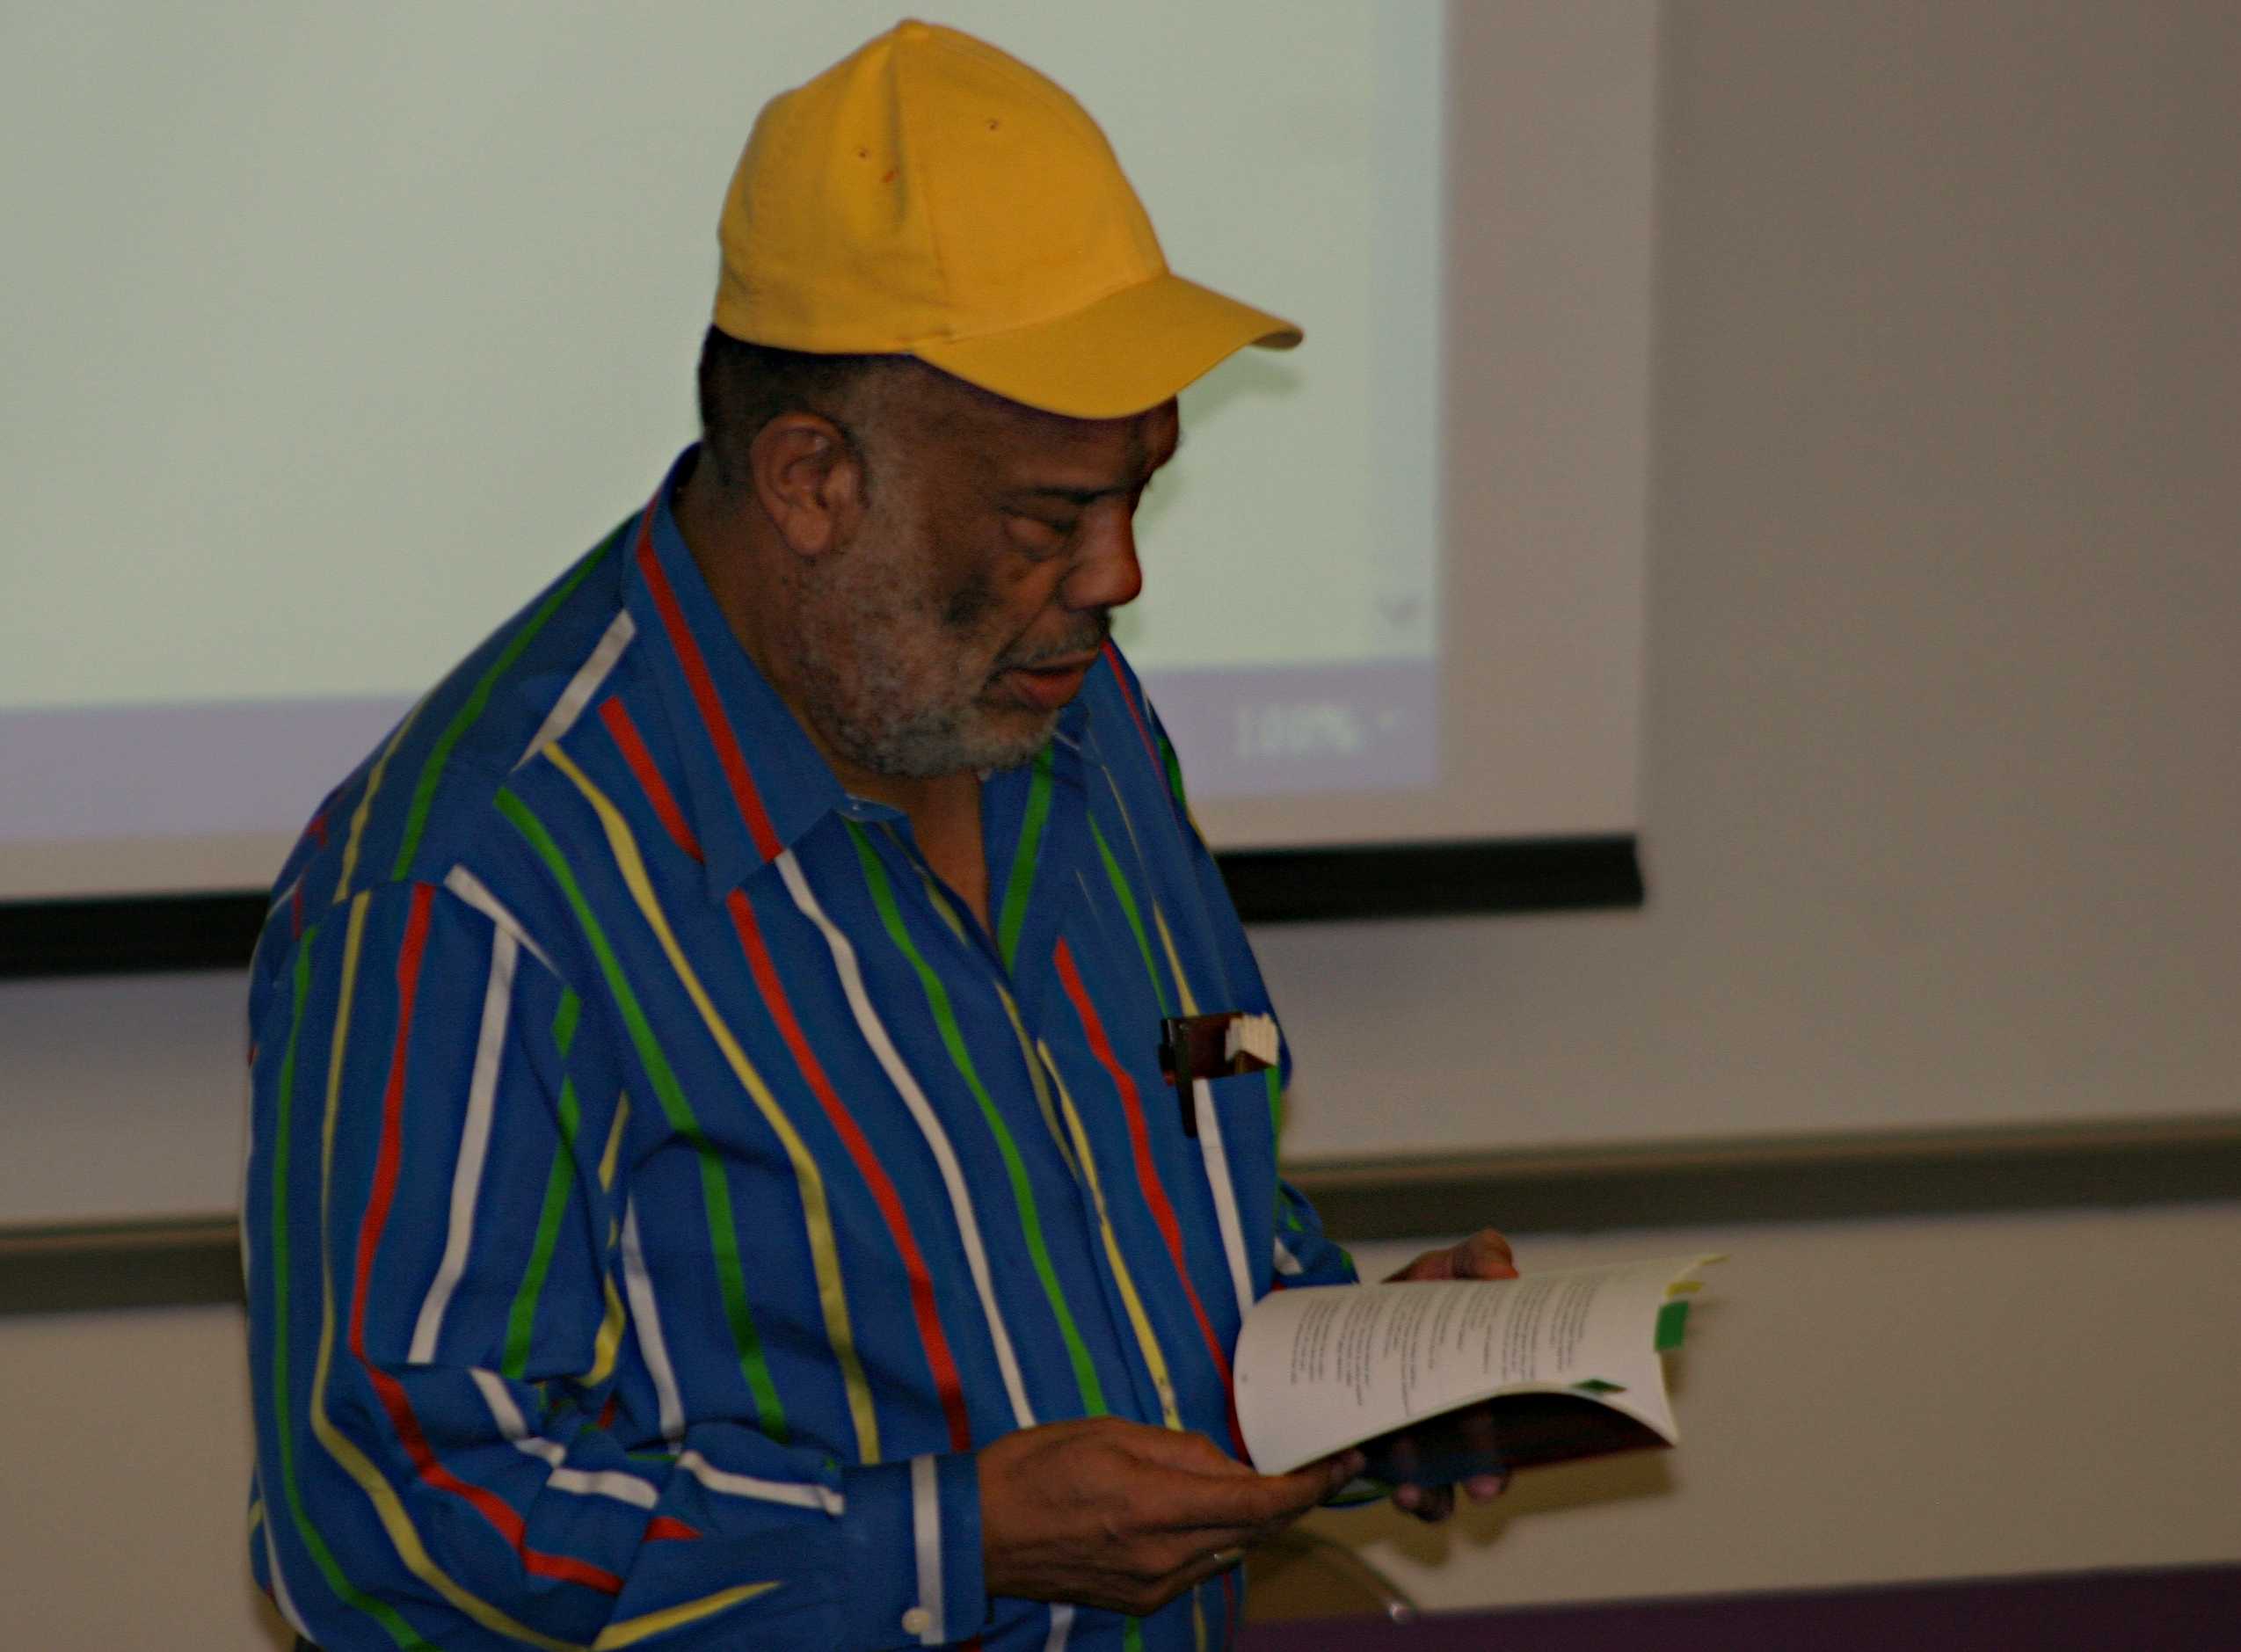 Professor Farrell Foreman speaking at an event during the 8th Annual San Diego City College Book Fair on Oct. 2. Jessica Ramirez, City Times.